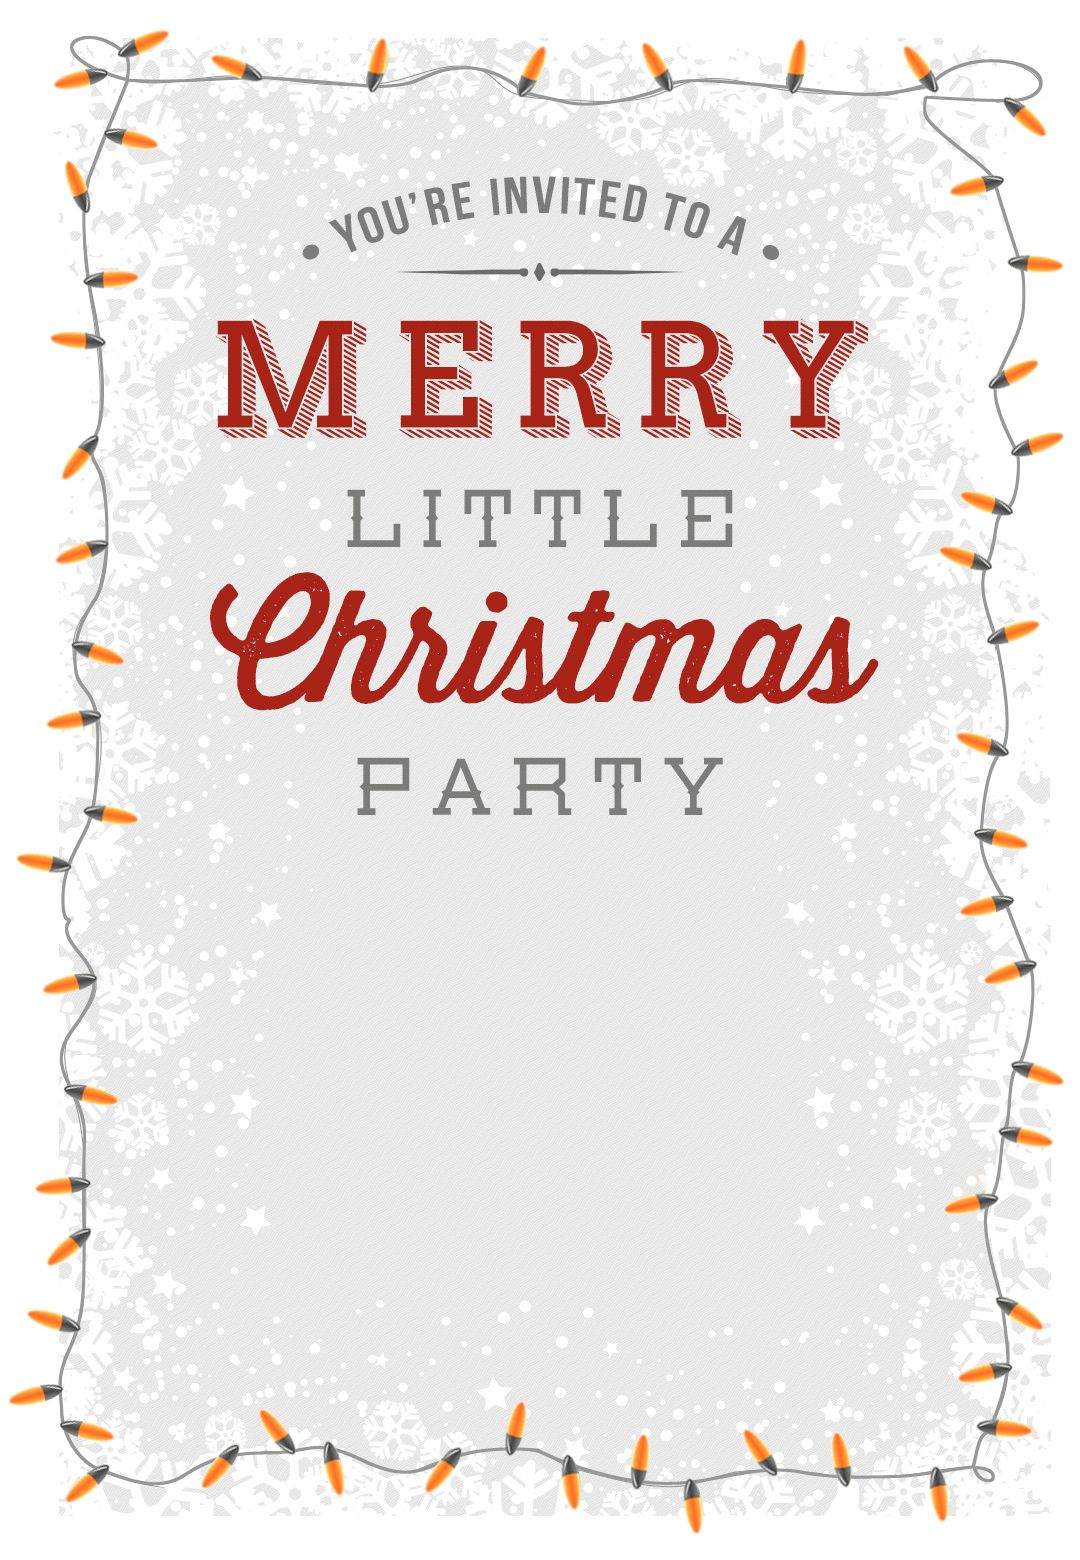 A Merry Little Party Free Printable Christmas Invitation Template within dimensions 1080 X 1560